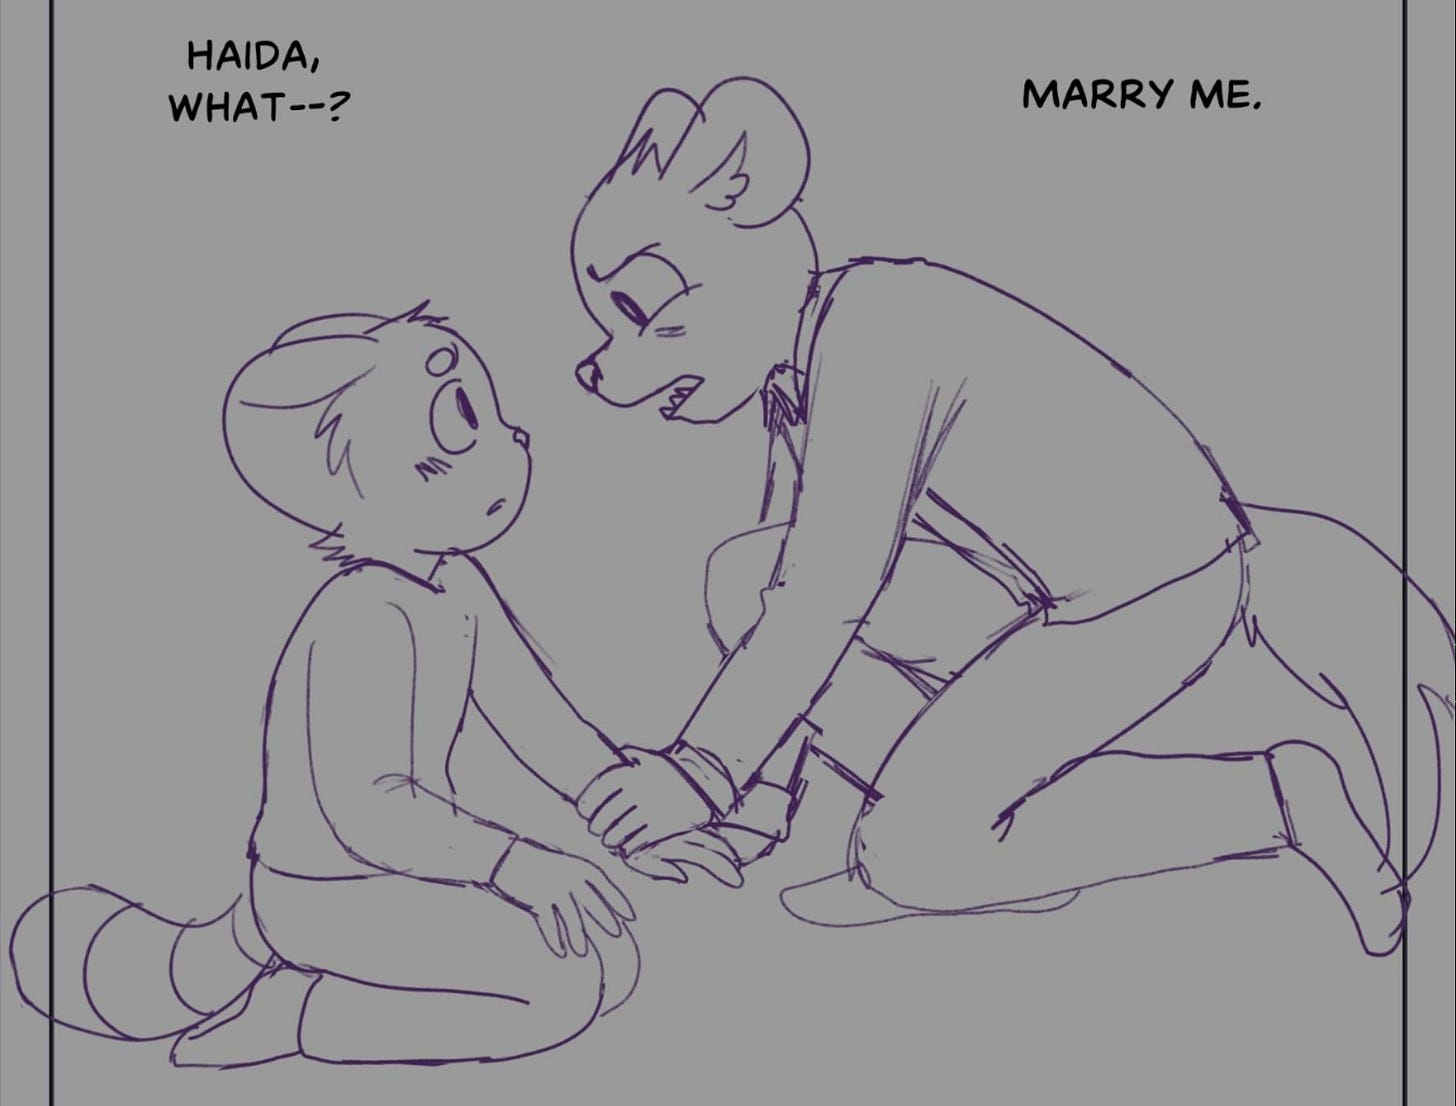 May be an image of text that says 'HAIDA, WHAT--? MARRY ME. 13'